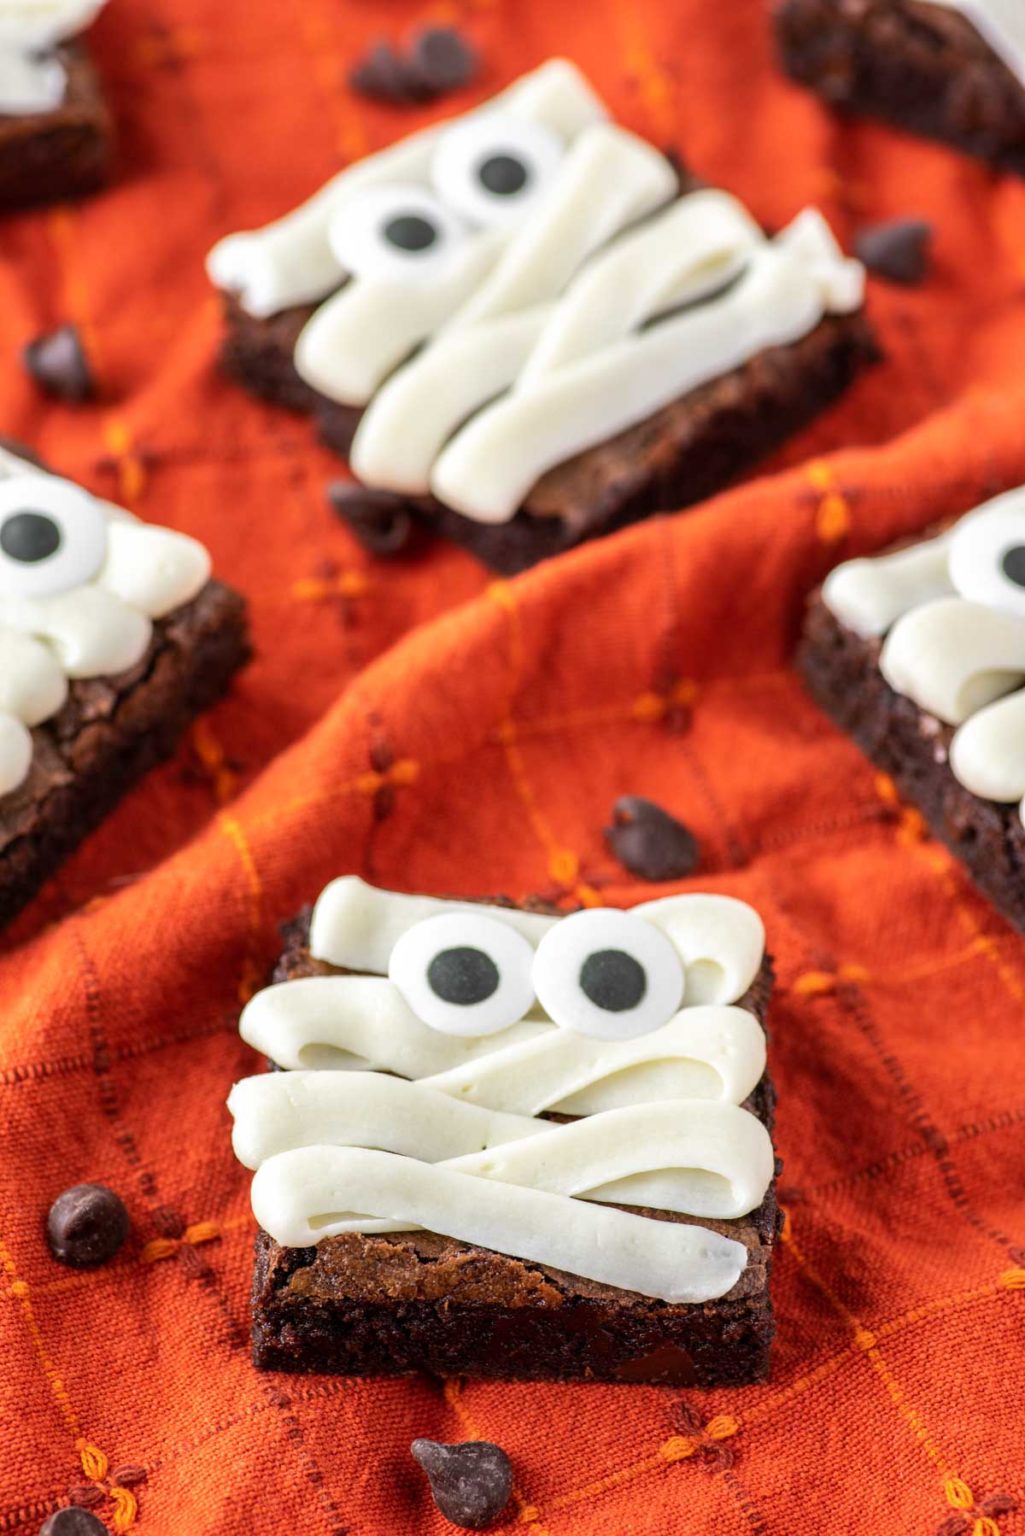 Mummy Brownies Recipe Chisel And Fork